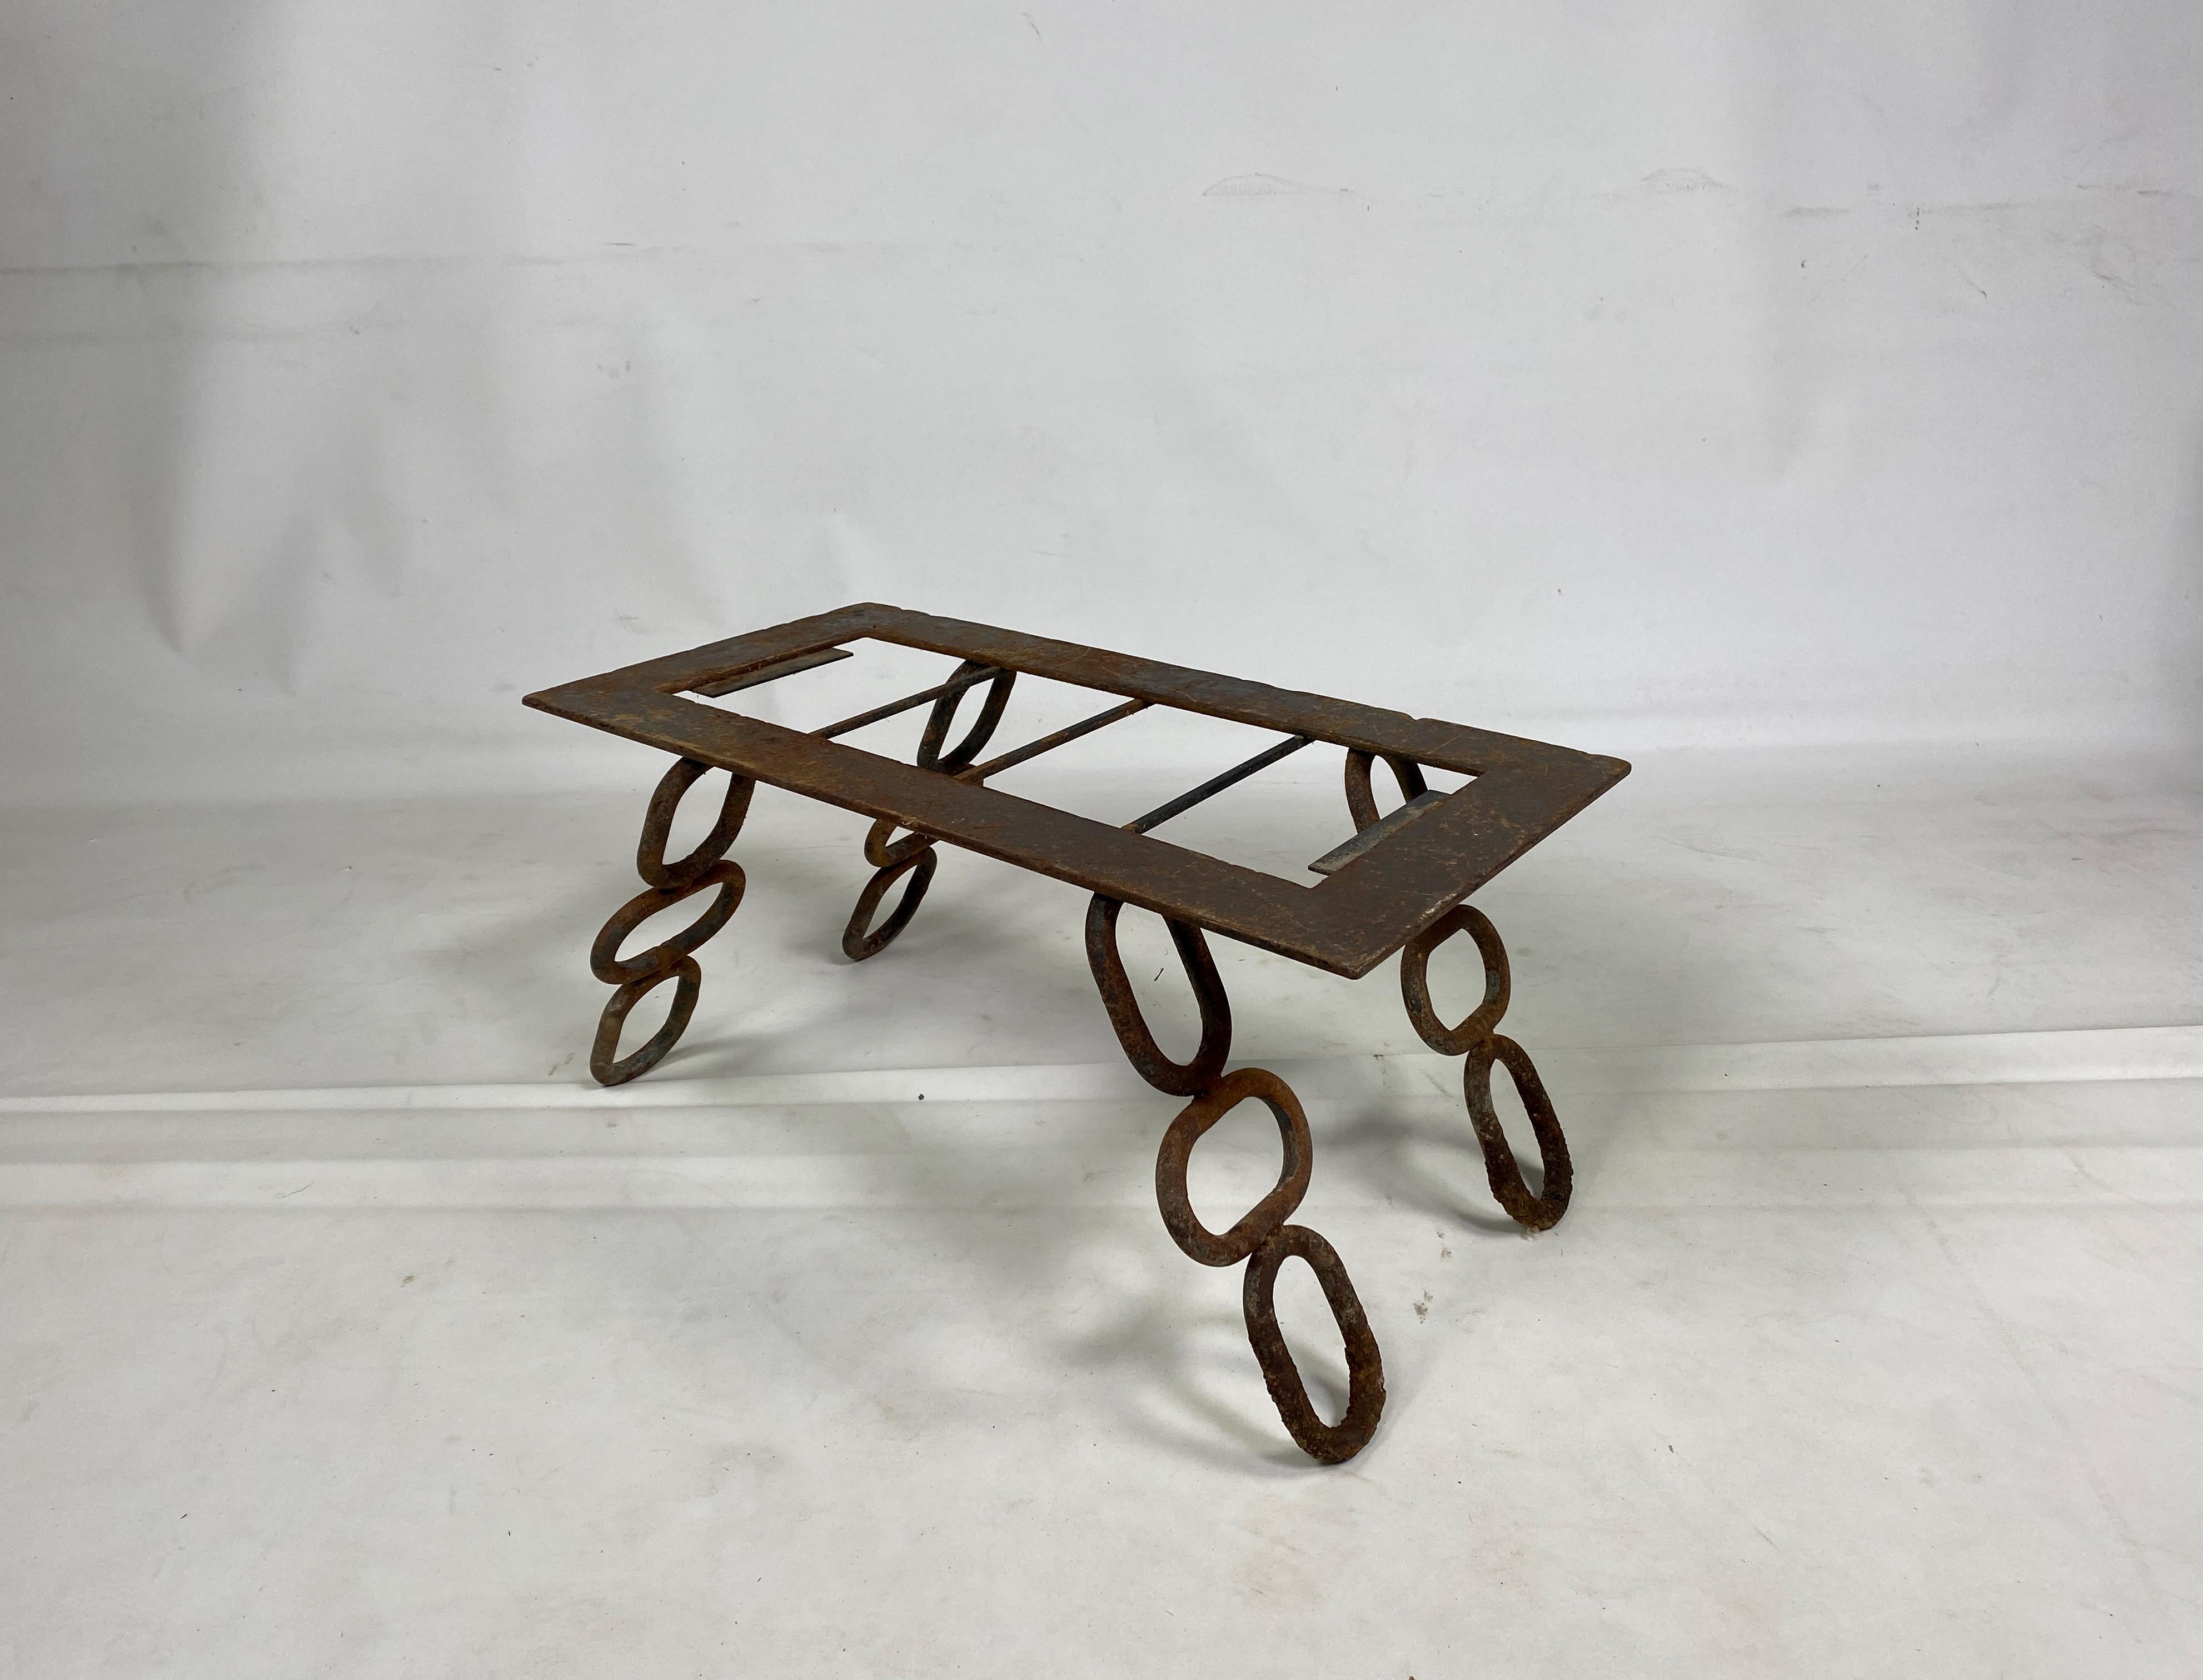 Coffee table

Iron frame

Glass insert

Untouched condition 

France, 1960s.